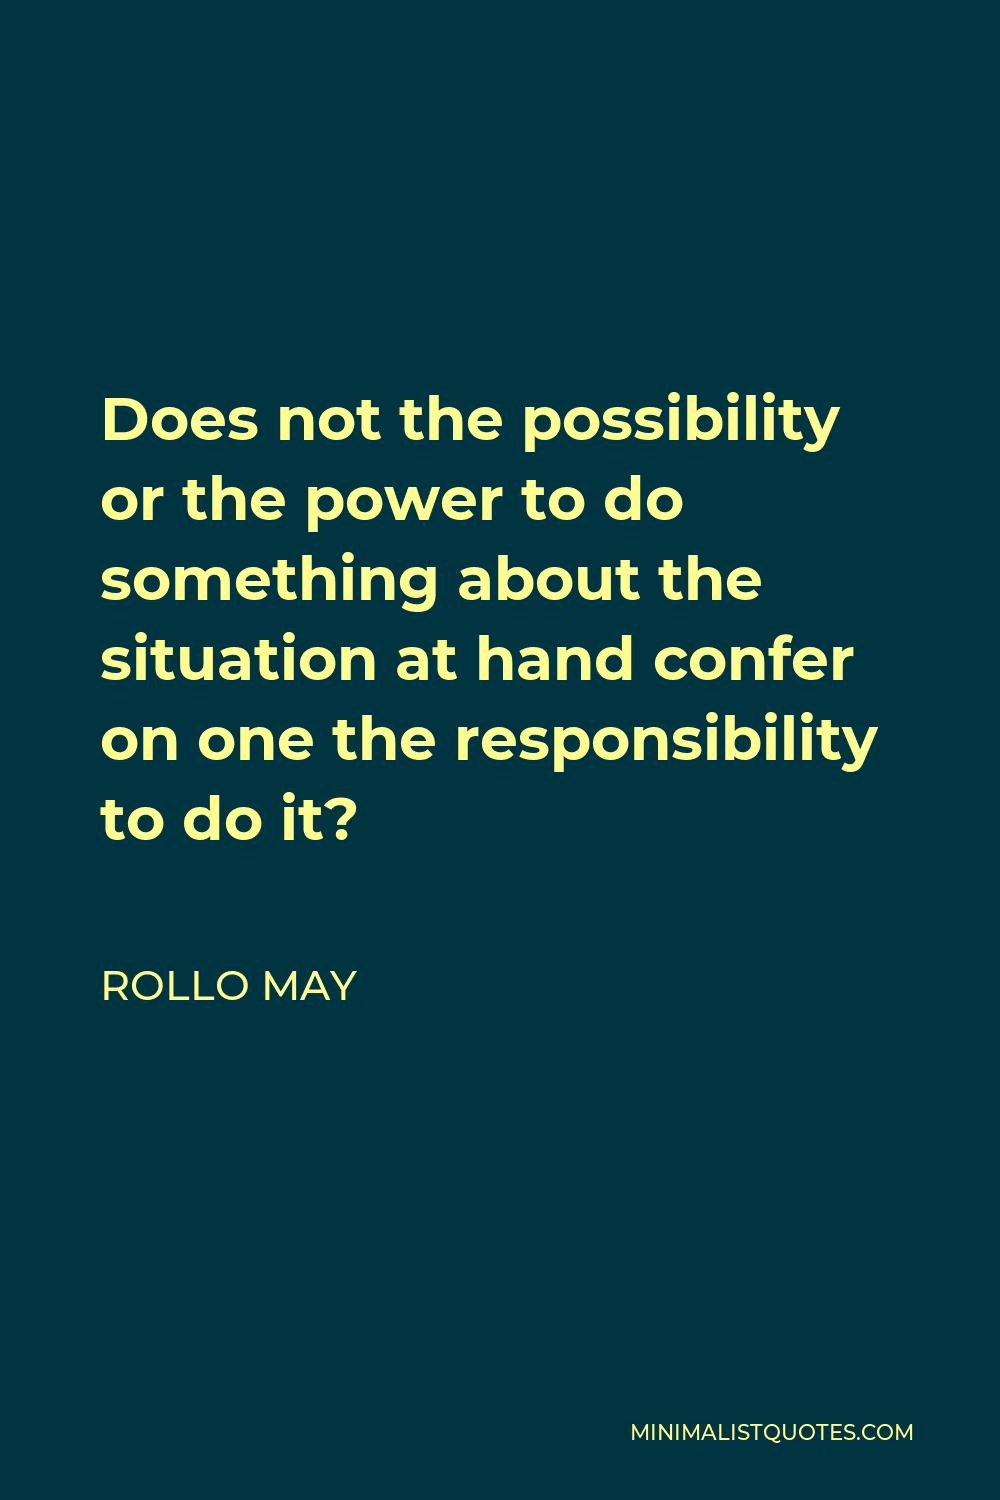 Rollo May Quote - Does not the possibility or the power to do something about the situation at hand confer on one the responsibility to do it?